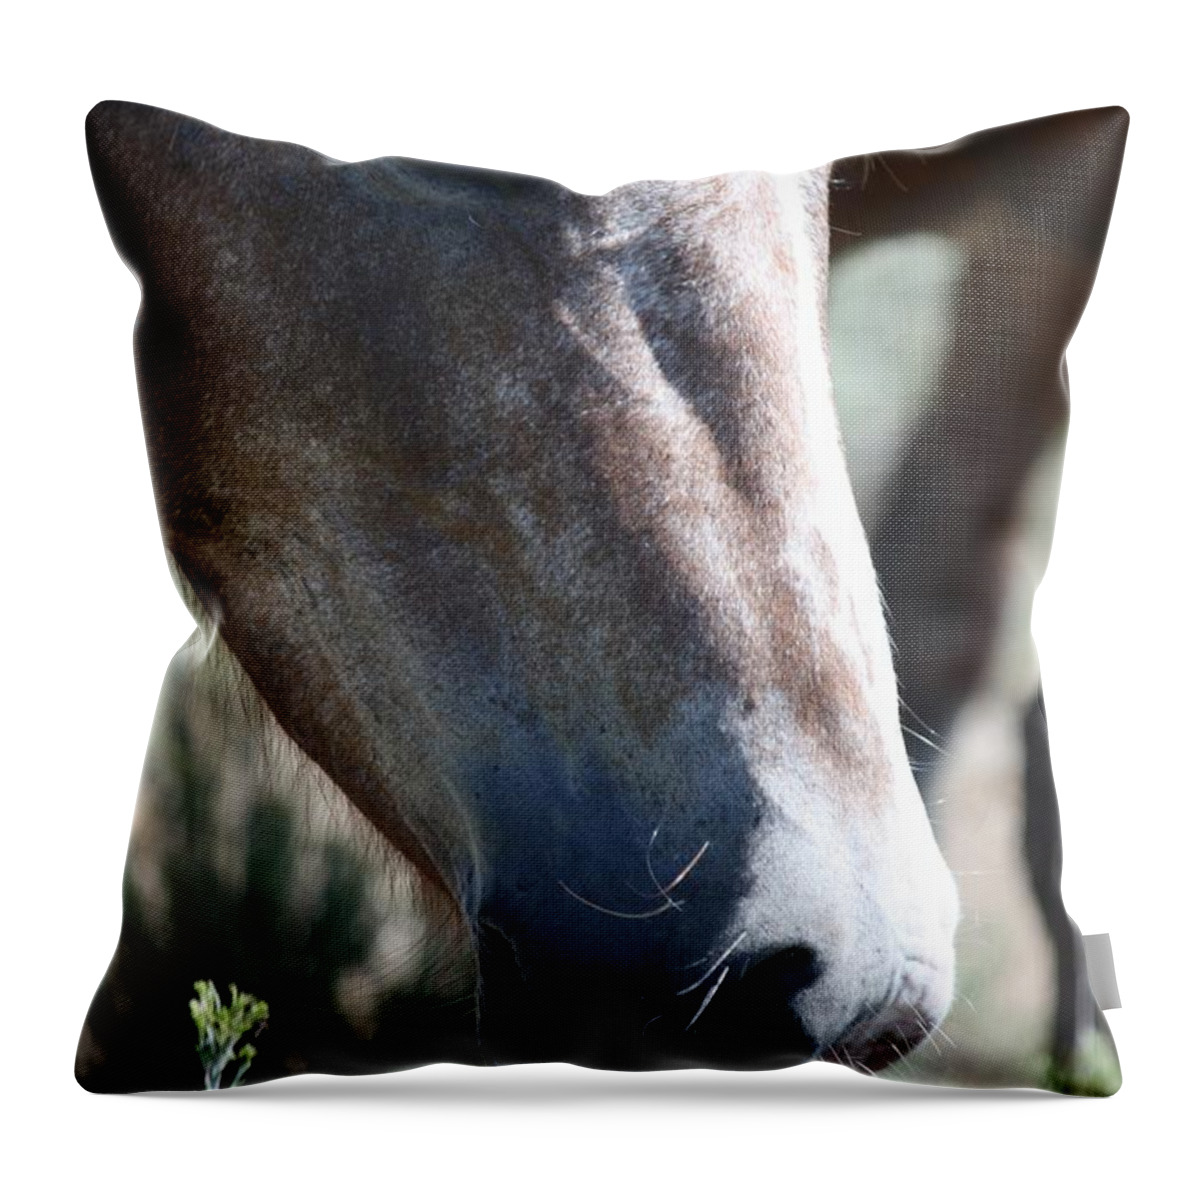 Horses Throw Pillow featuring the photograph Close Up Beauty - Monero Mustangs Sanctuary by Veronica Batterson